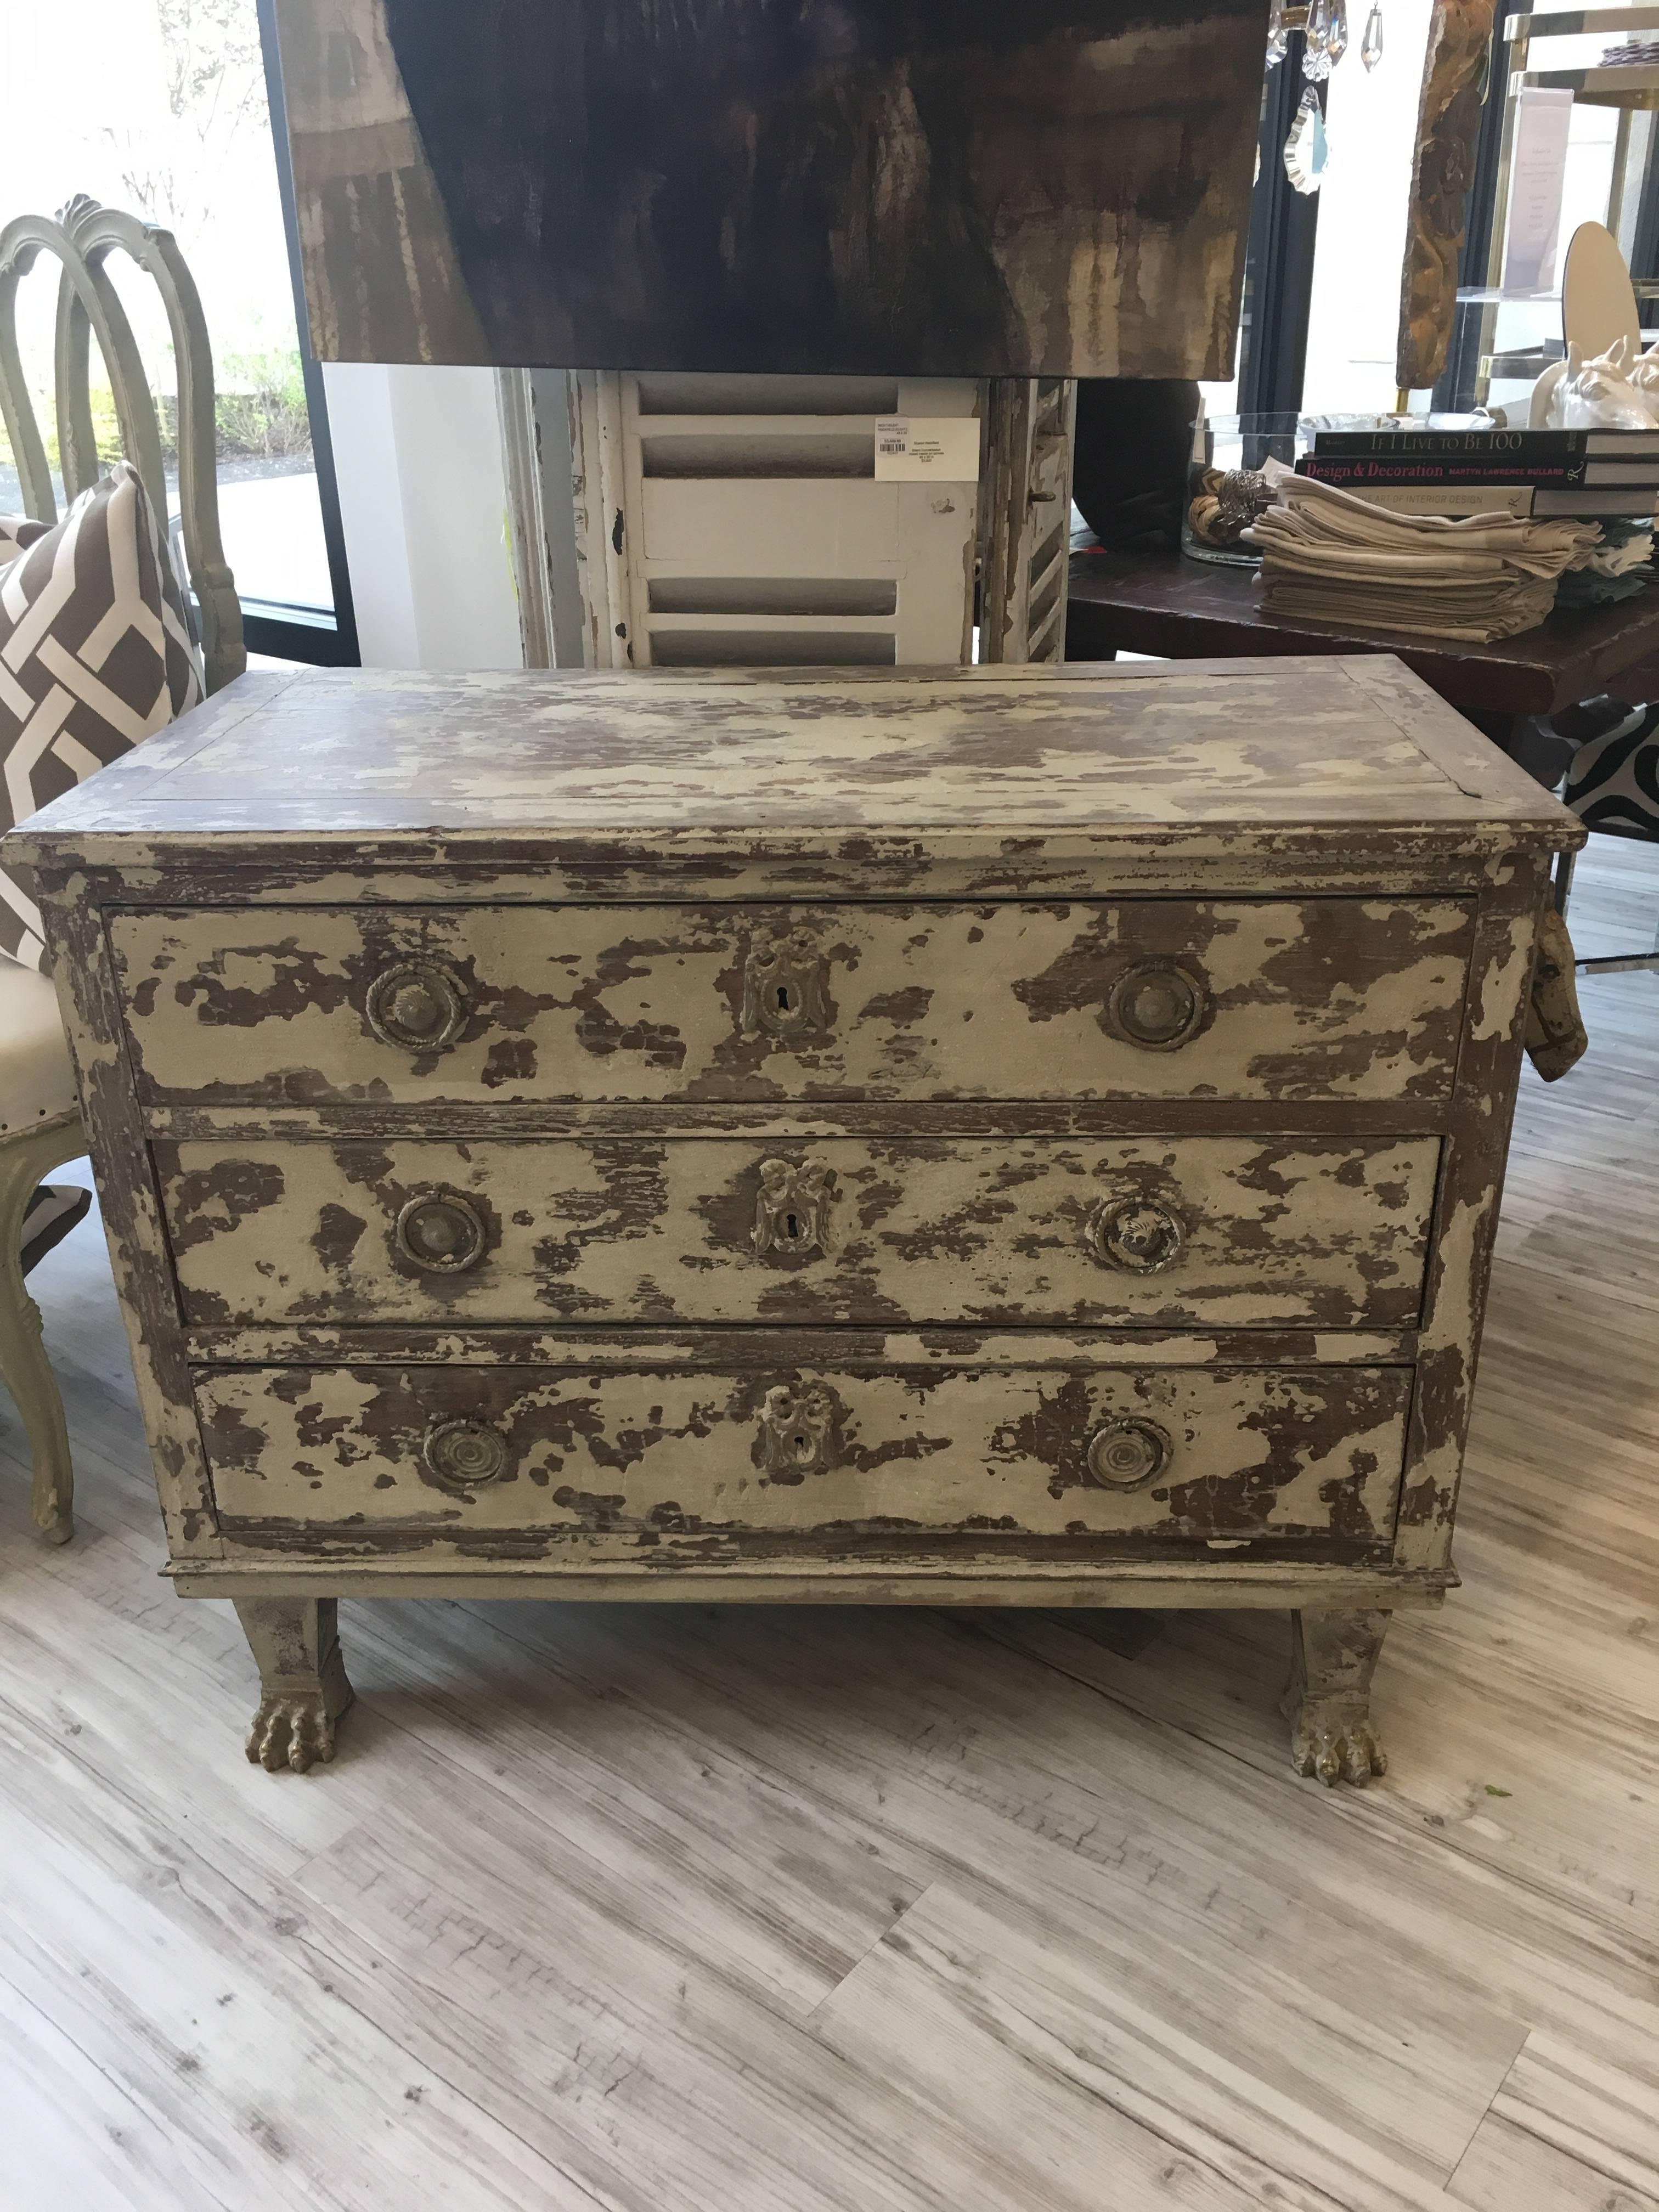 This French distressed finish commode from the early 20th century features a simple rectangular top over three dovetailed drawers. Each drawer is adorned with two ring pulls and a central escutcheon with a Louis XVI knot motif. The sides are made of